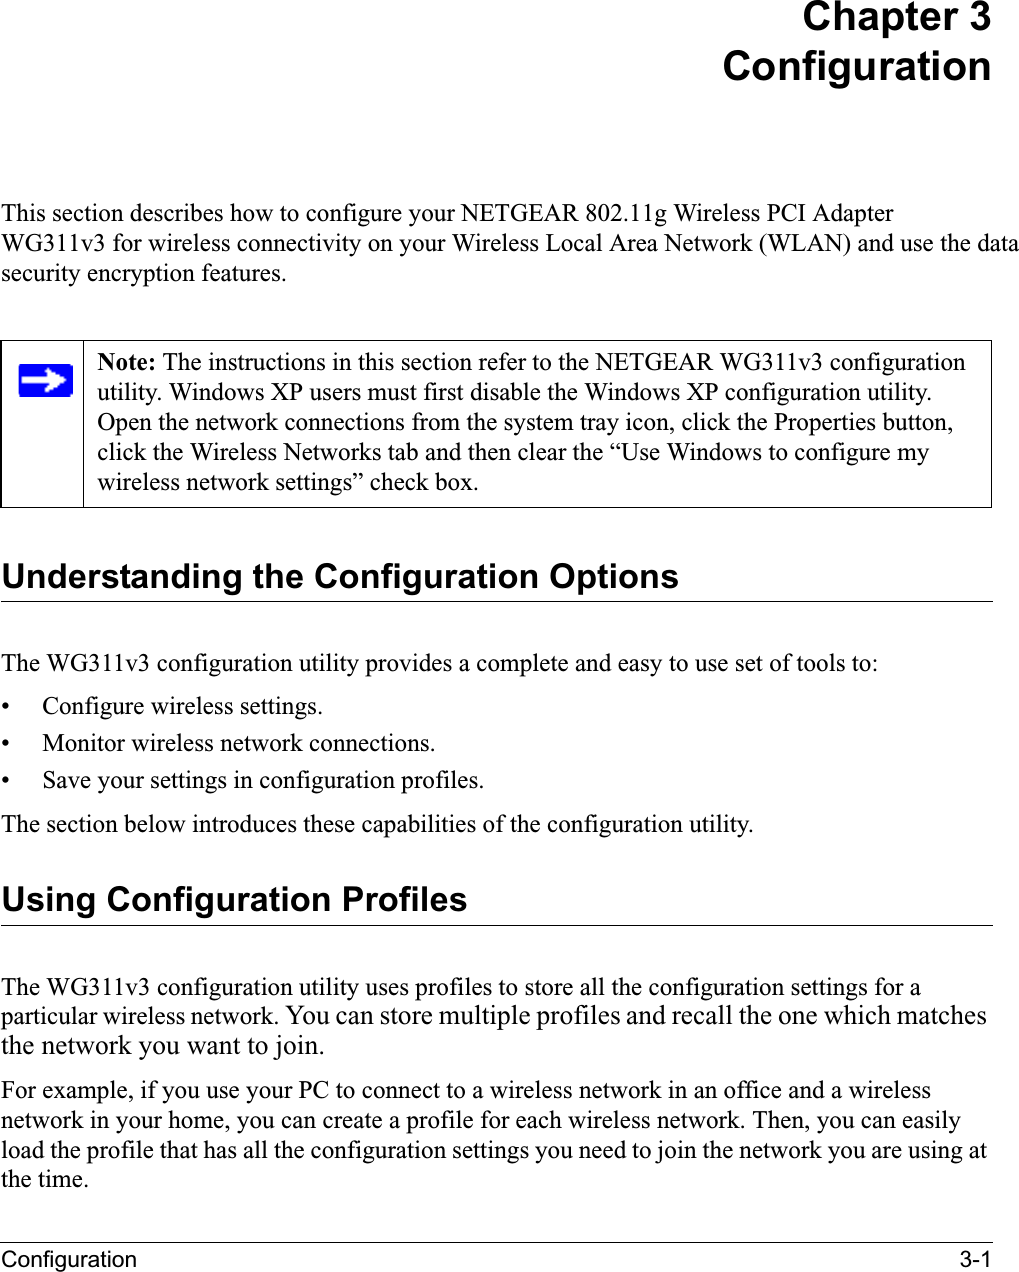 Configuration 3-1Chapter 3ConfigurationThis section describes how to configure your NETGEAR 802.11g Wireless PCI AdapterWG311v3 for wireless connectivity on your Wireless Local Area Network (WLAN) and use the datasecurity encryption features. Understanding the Configuration OptionsThe WG311v3 configuration utility provides a complete and easy to use set of tools to:• Configure wireless settings.• Monitor wireless network connections.• Save your settings in configuration profiles.The section below introduces these capabilities of the configuration utility. Using Configuration ProfilesThe WG311v3 configuration utility uses profiles to store all the configuration settings for a particular wireless network. You can store multiple profiles and recall the one which matches the network you want to join.For example, if you use your PC to connect to a wireless network in an office and a wireless network in your home, you can create a profile for each wireless network. Then, you can easily load the profile that has all the configuration settings you need to join the network you are using at the time. Note: The instructions in this section refer to the NETGEAR WG311v3 configuration utility. Windows XP users must first disable the Windows XP configuration utility. Open the network connections from the system tray icon, click the Properties button, click the Wireless Networks tab and then clear the “Use Windows to configure my wireless network settings” check box.